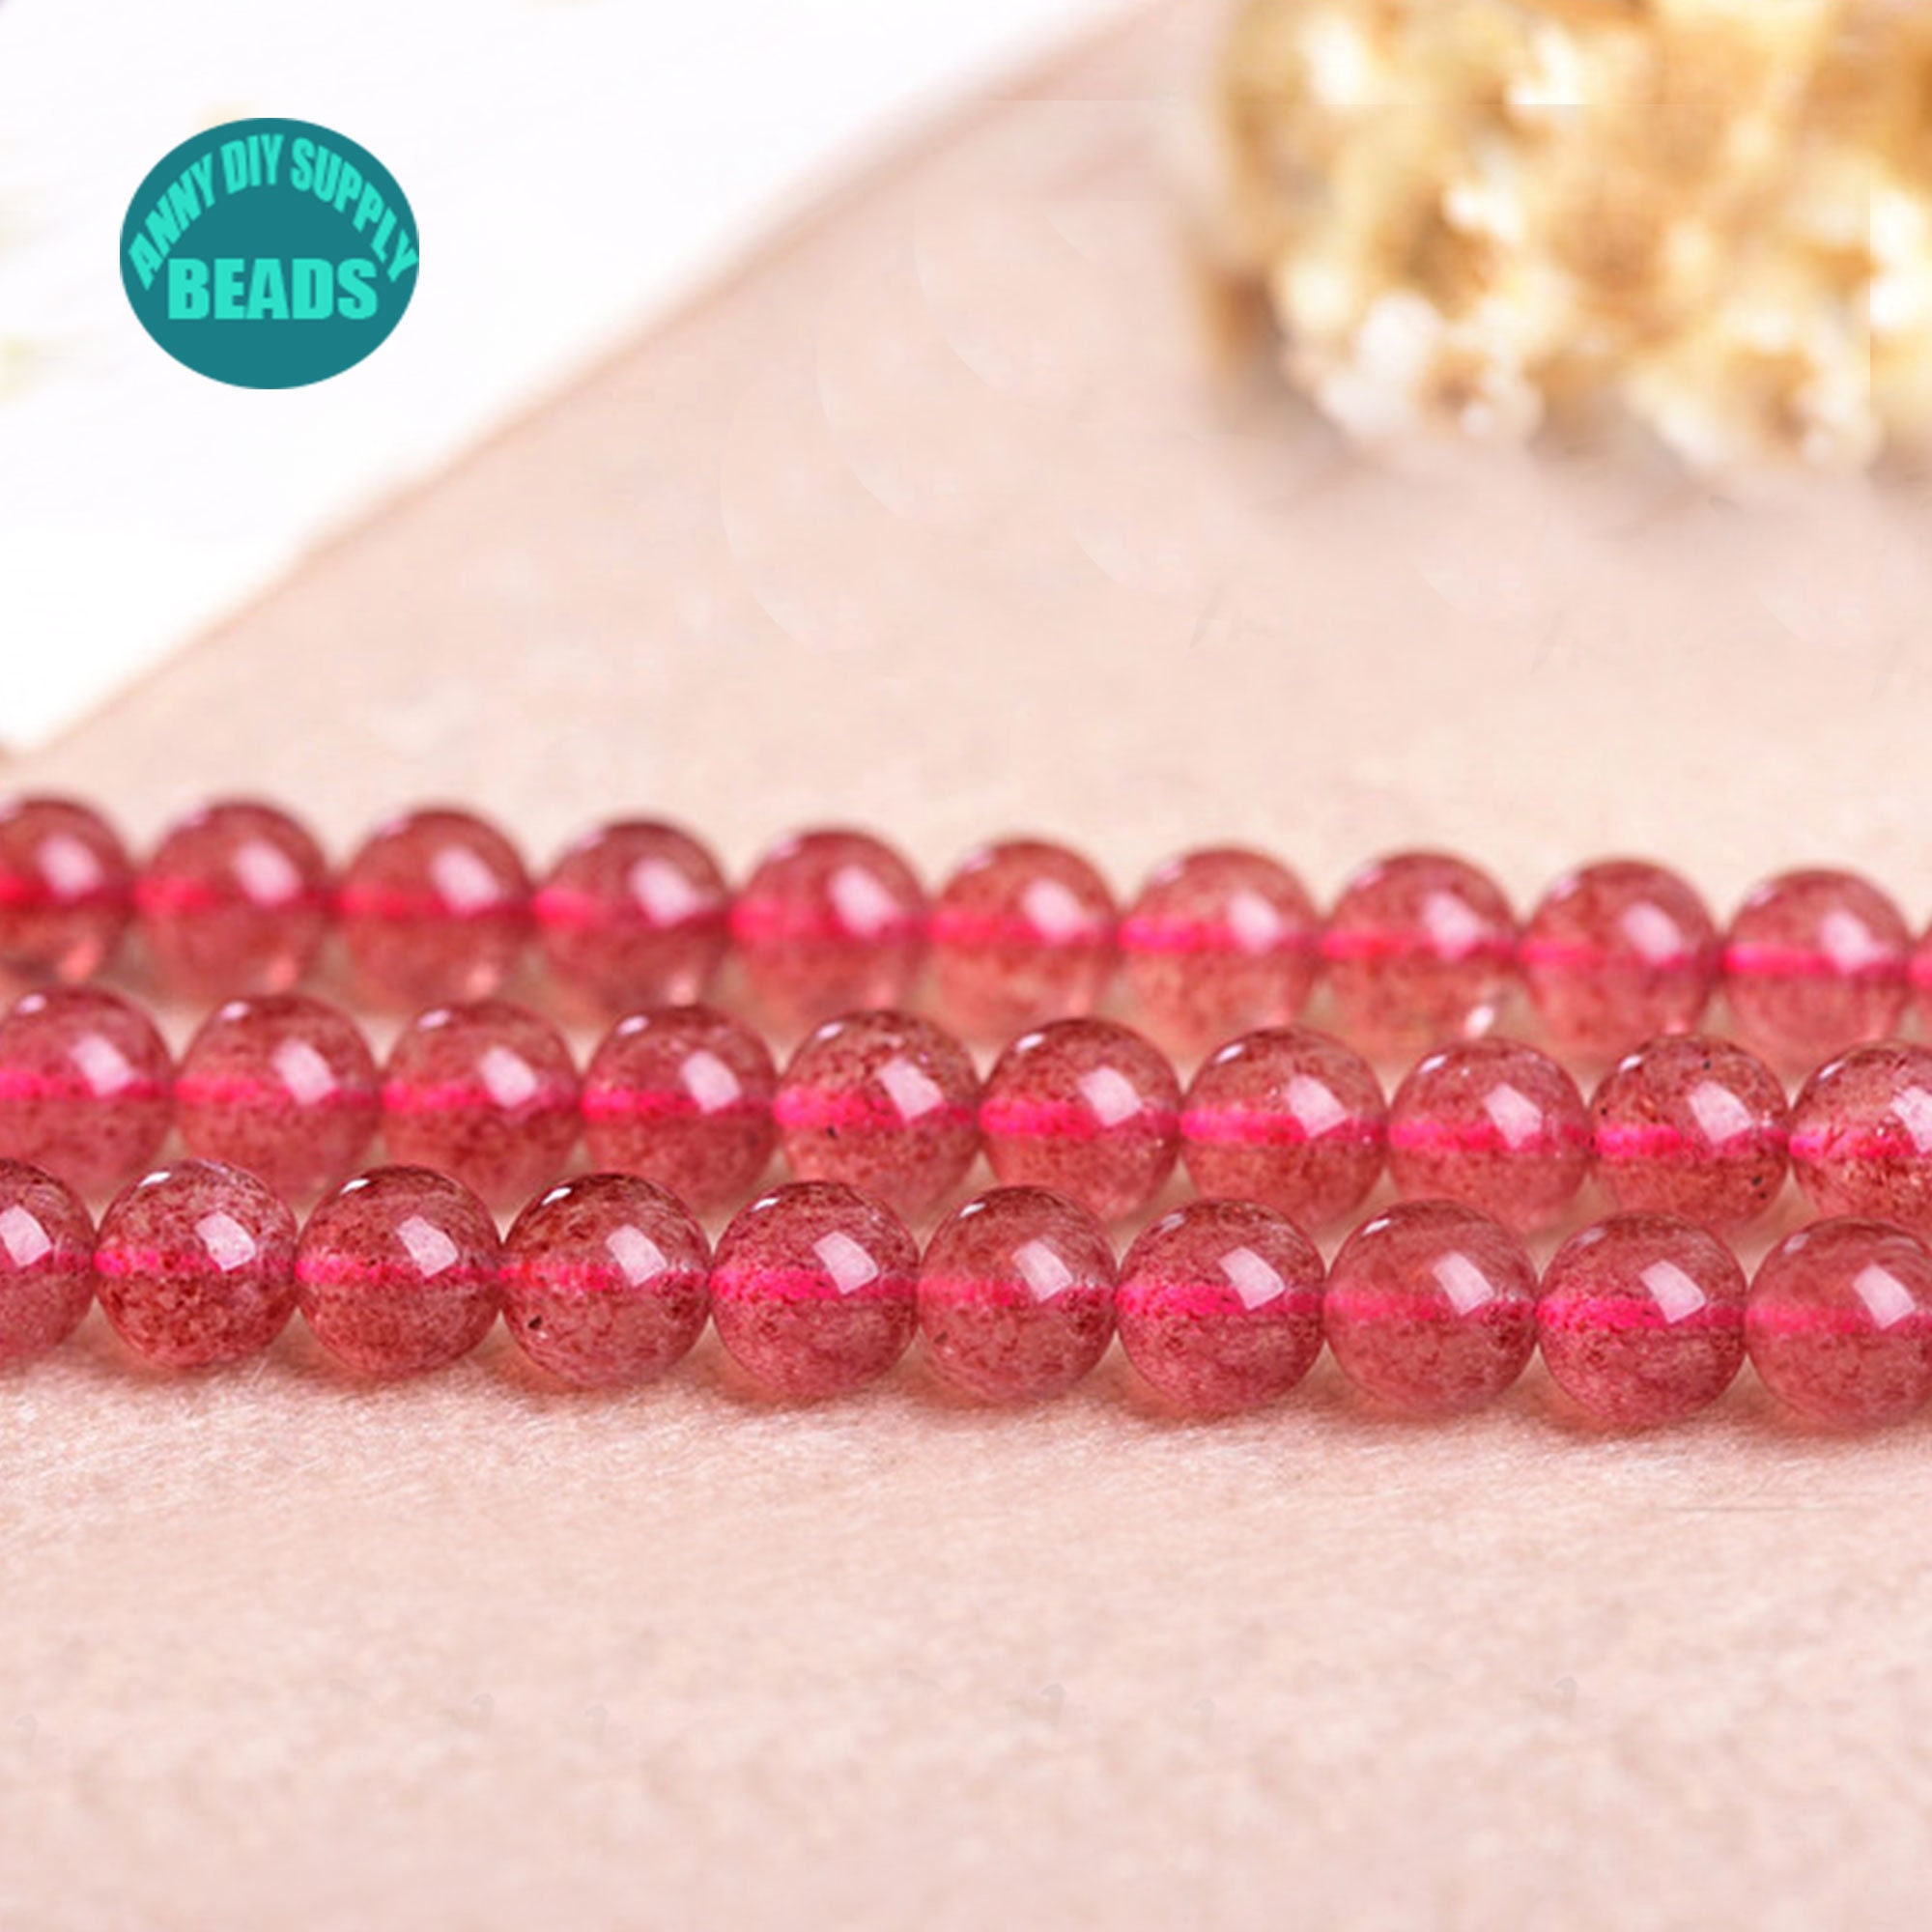 Faceted Strawberry Quartz Oval Crystal Gem Rhodonite Beads Natural Stone,  10x20mm Size For Bracelet And Necklace Making From Sohucom, $33.64